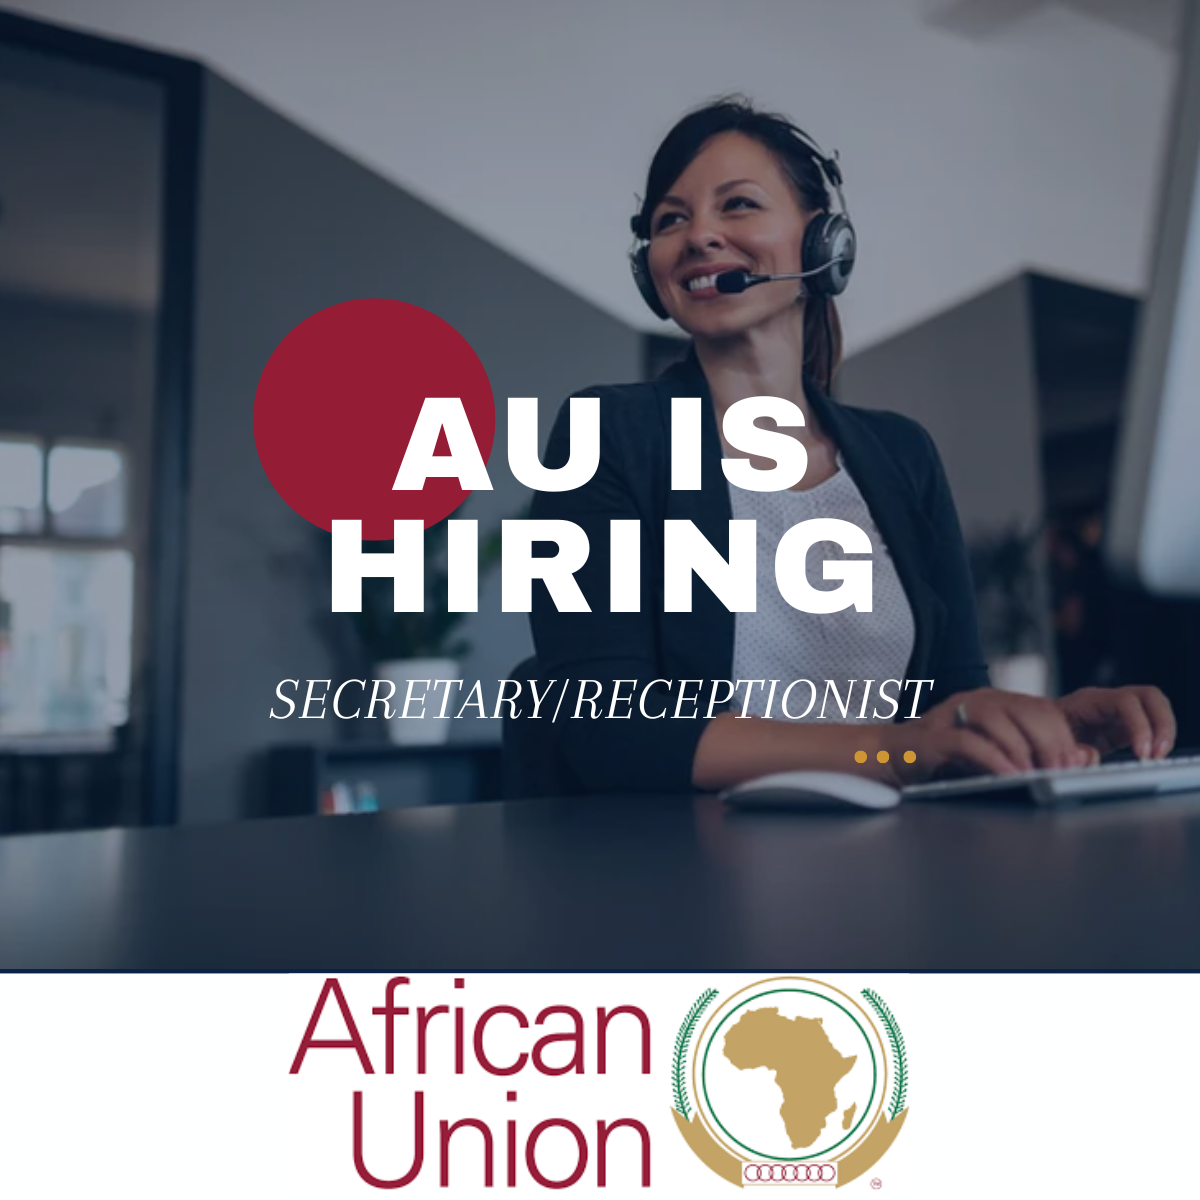 Join the Africa Union (AU) team as a Secretary/Receptionist. Apply today!